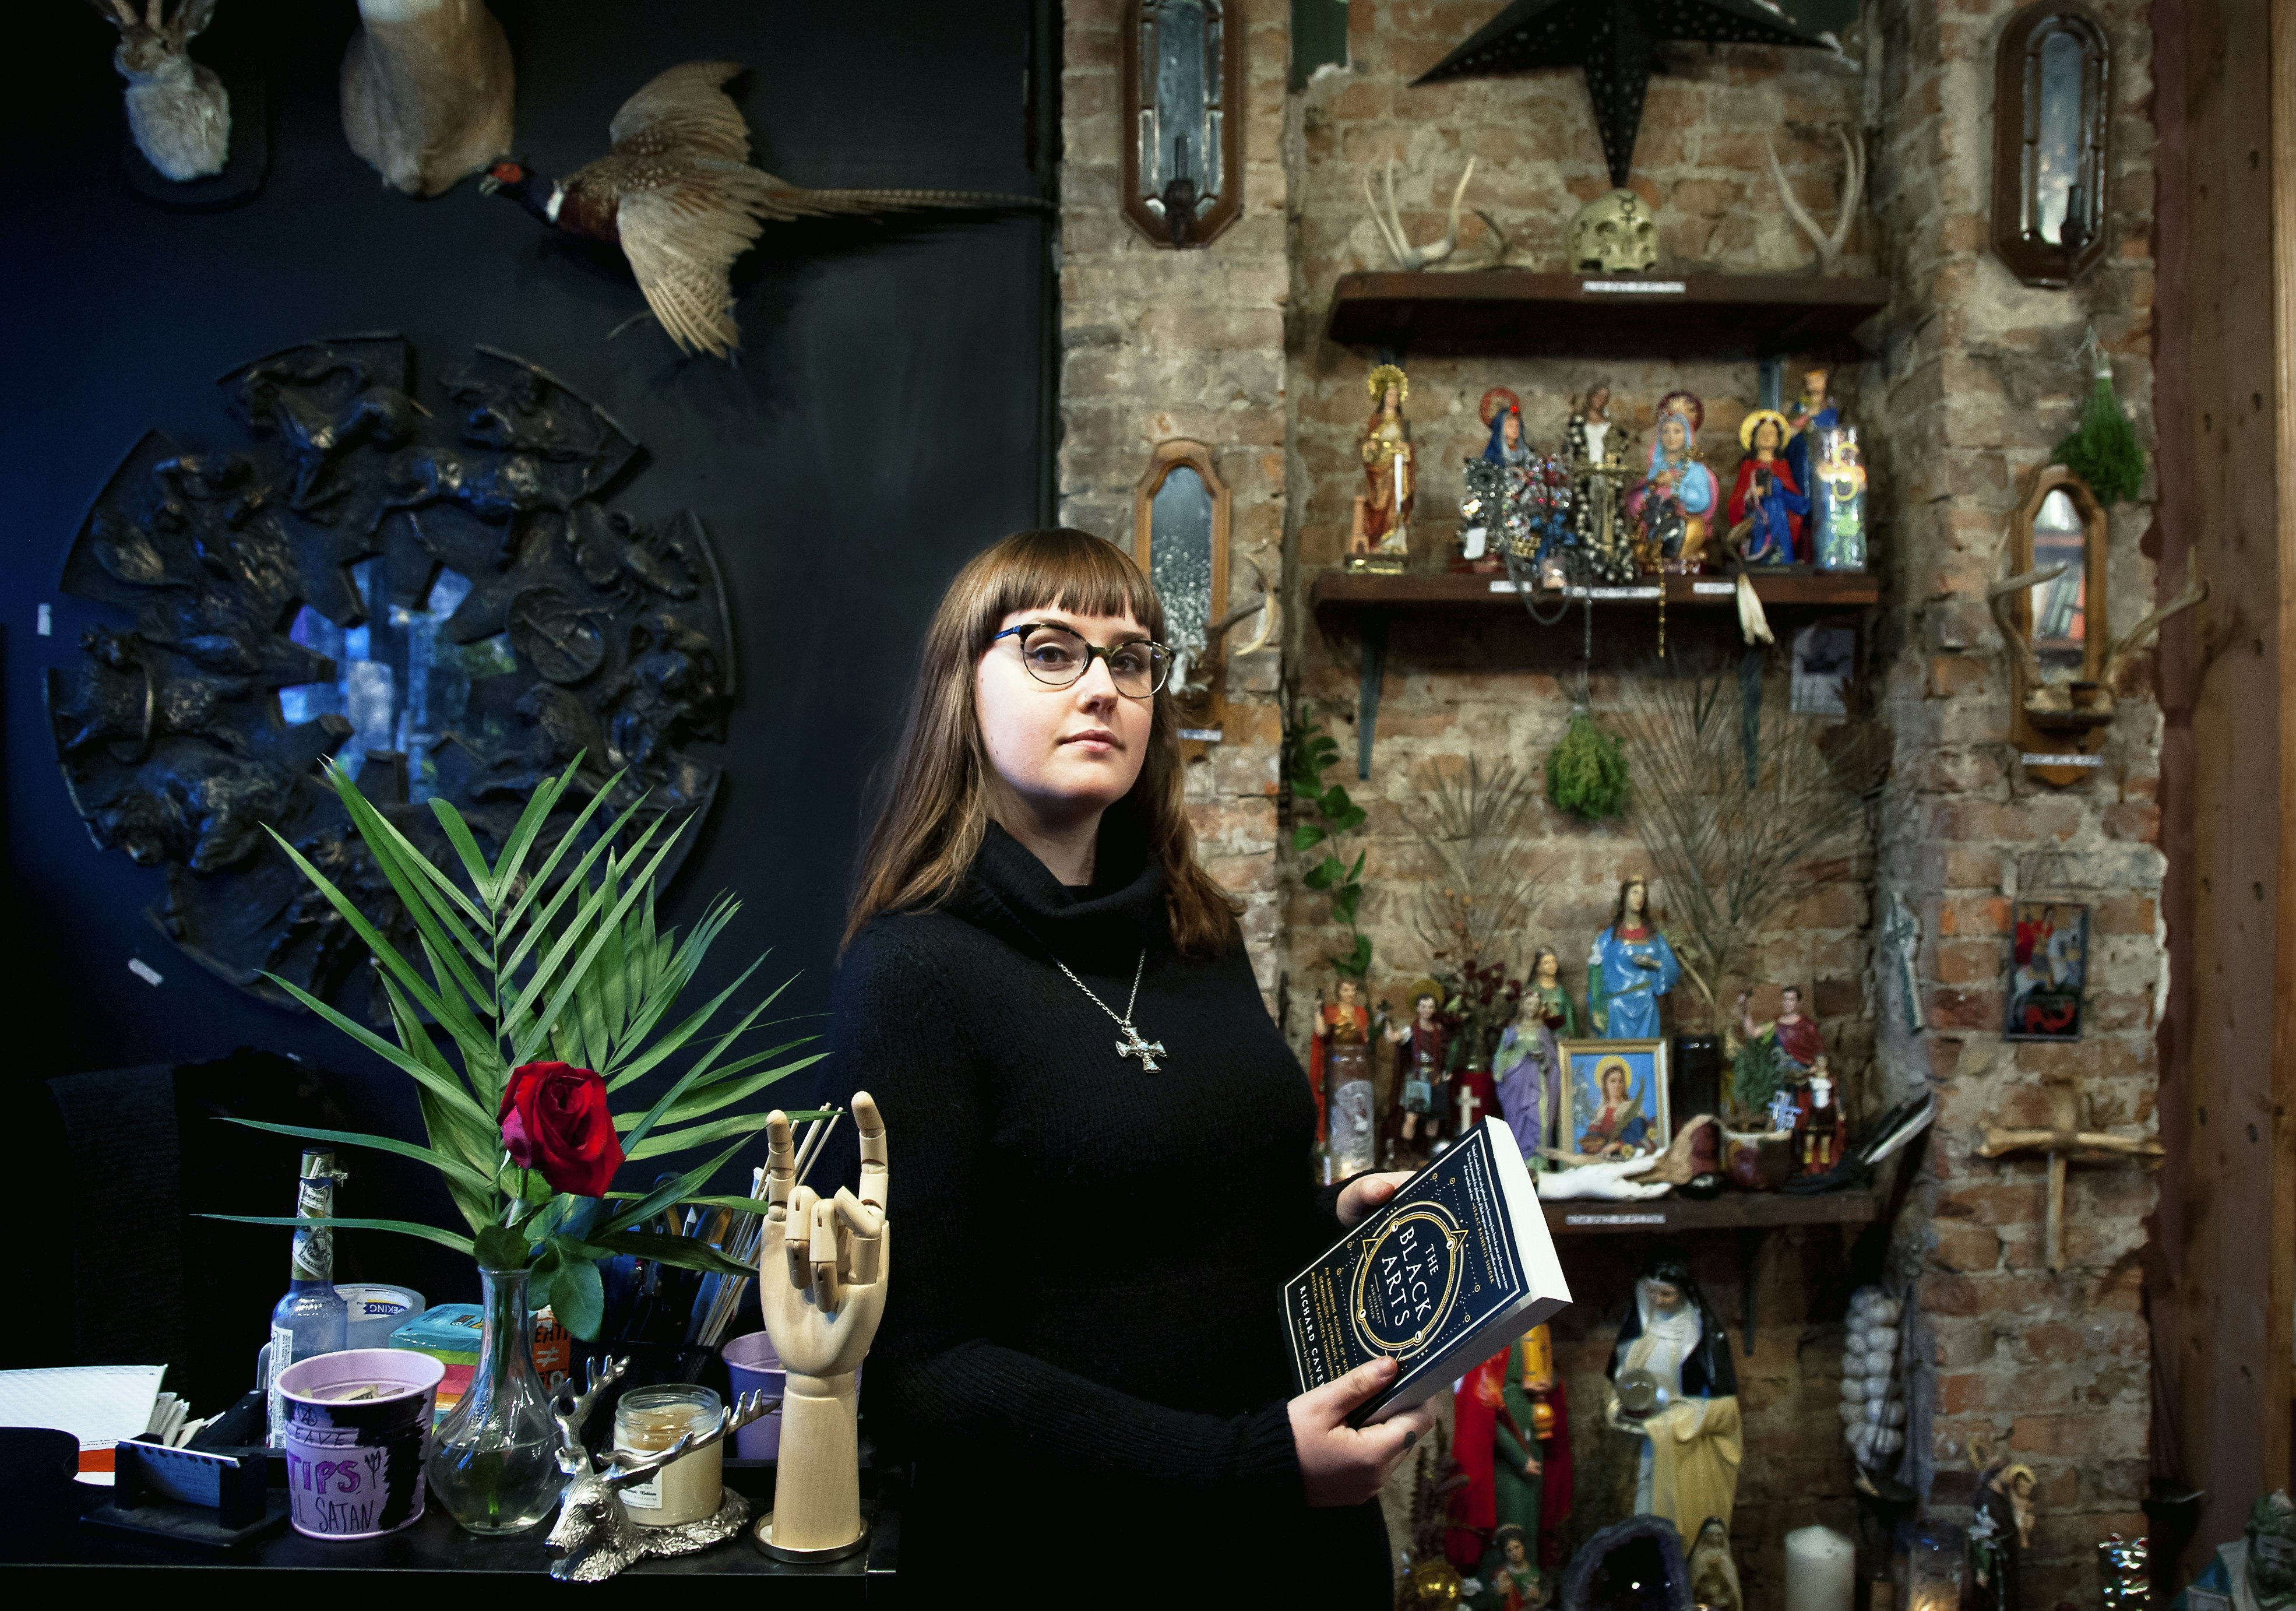 Melissa Madara, co-owner of Catland Books, is a folk witch, herbalist, and skilled scryer who performs readings aimed at finding practical solutions to life's questions